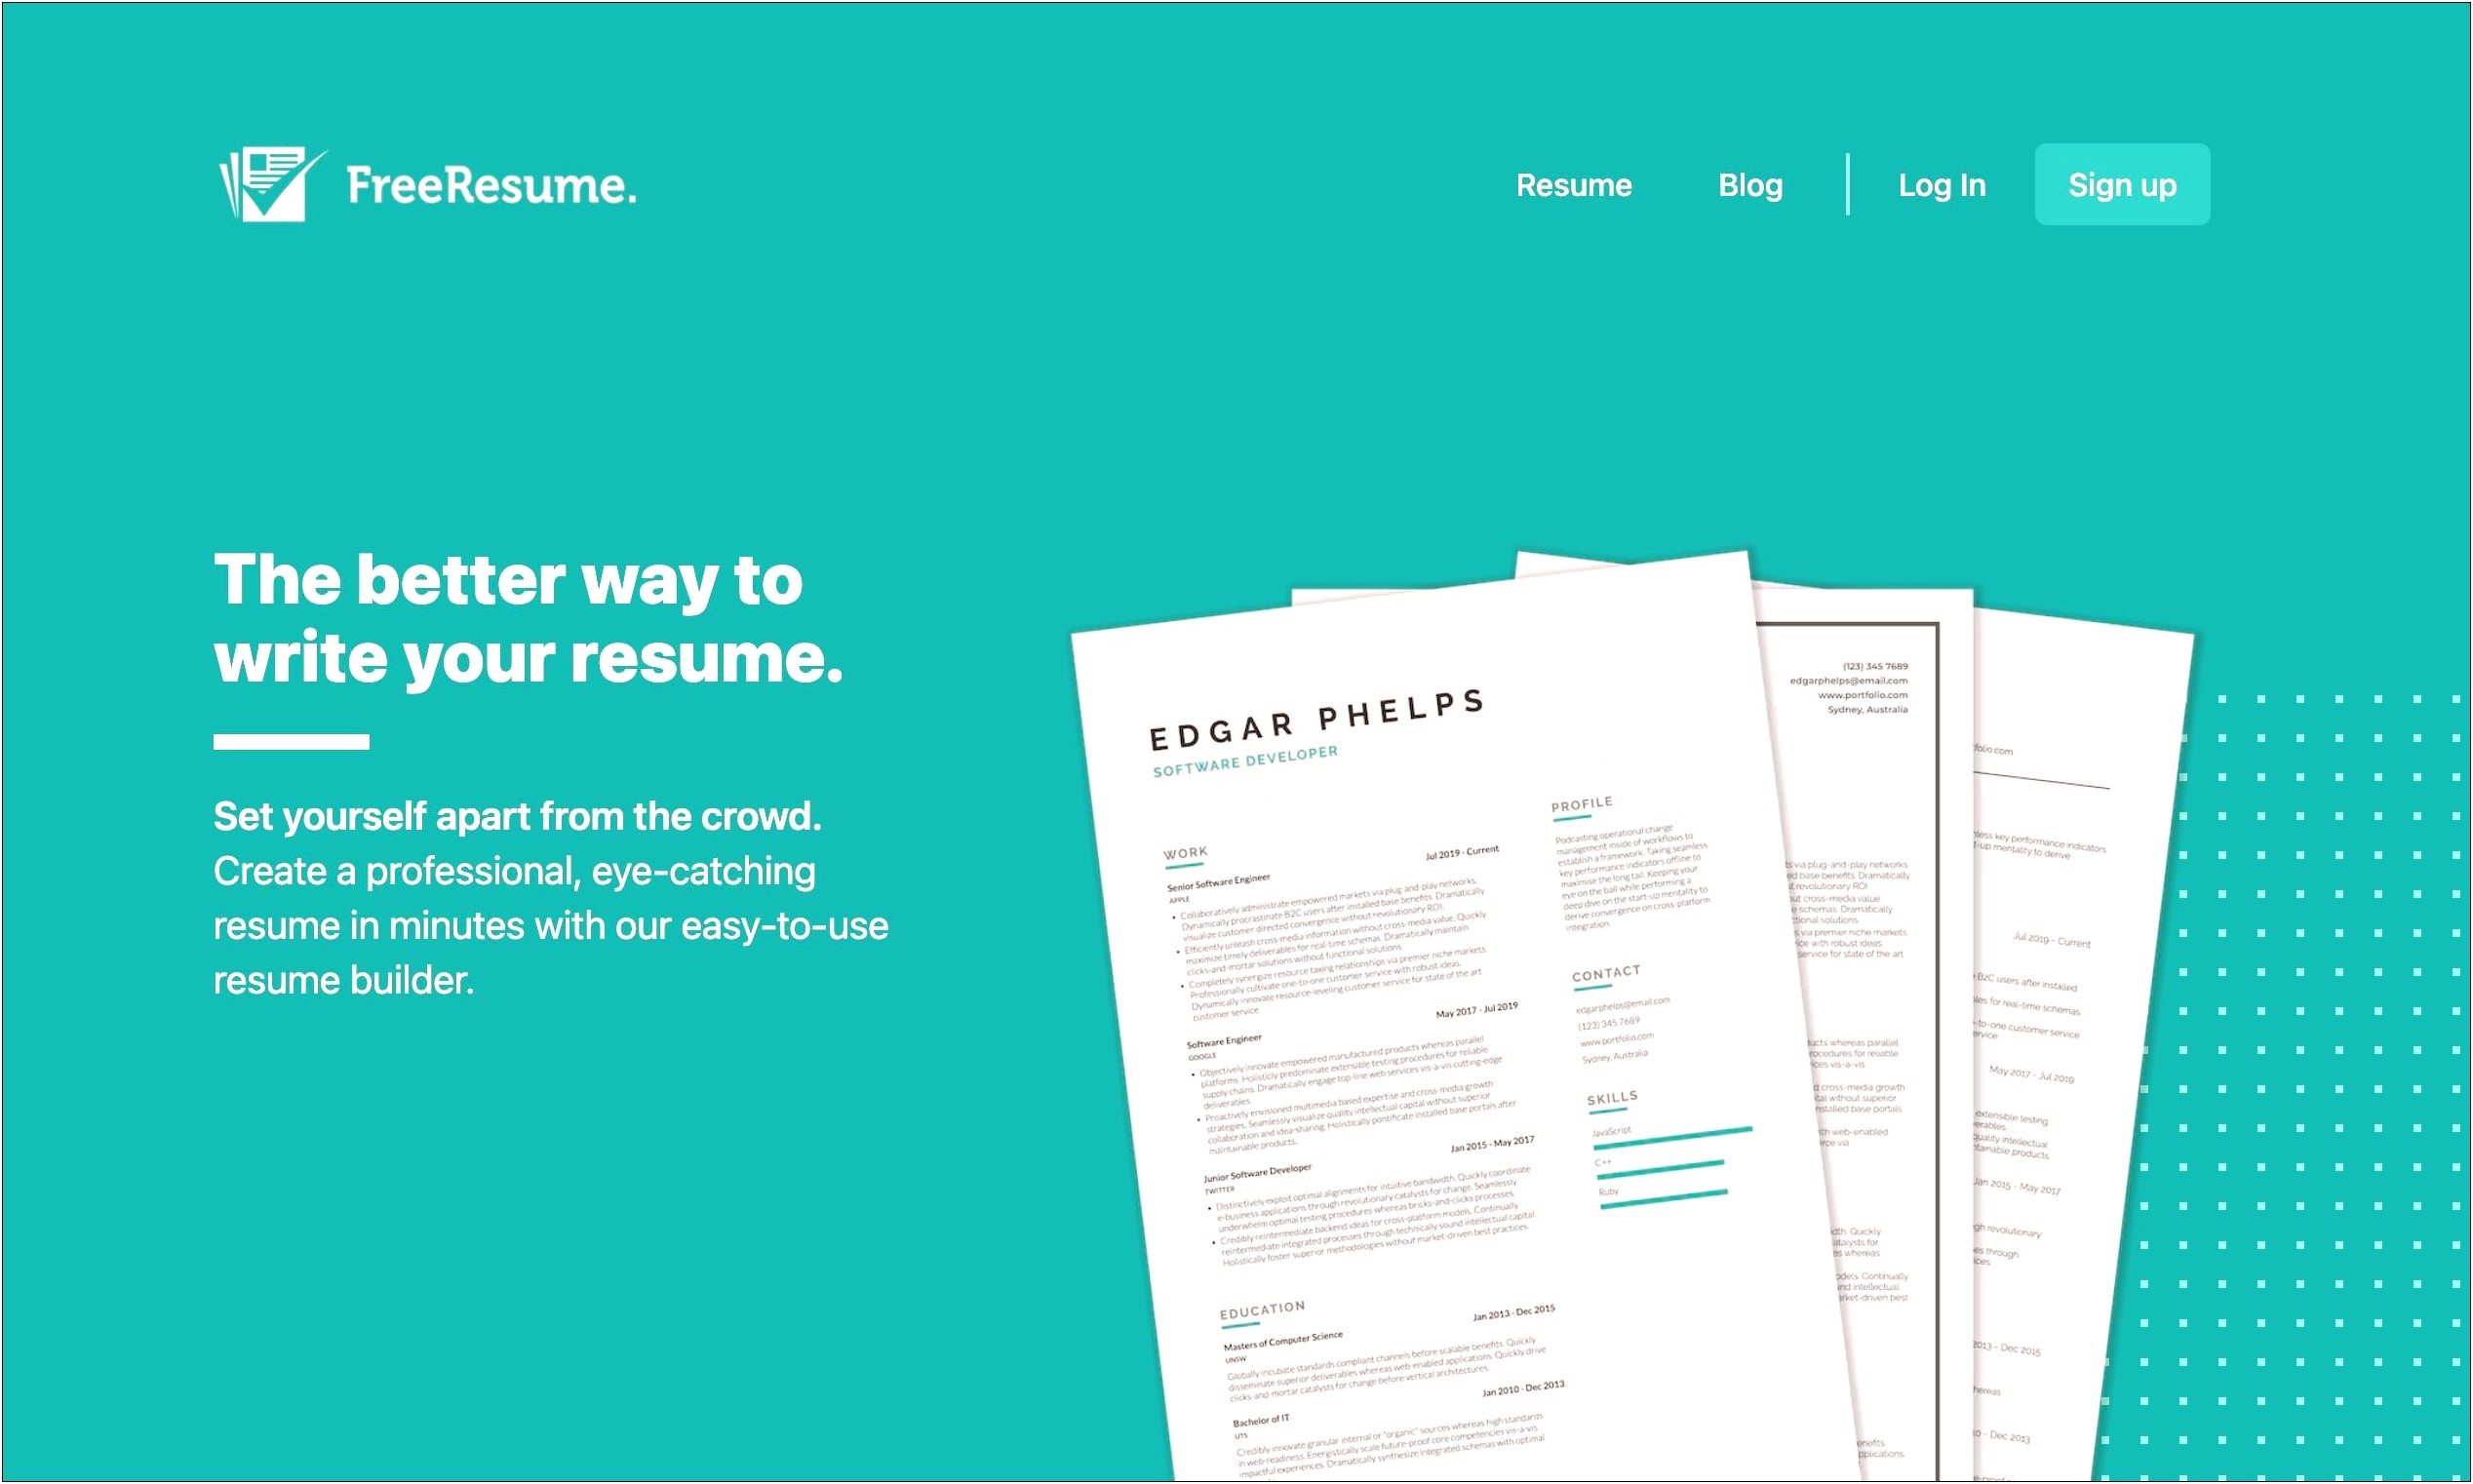 Is There Any Really Free Resume Builders